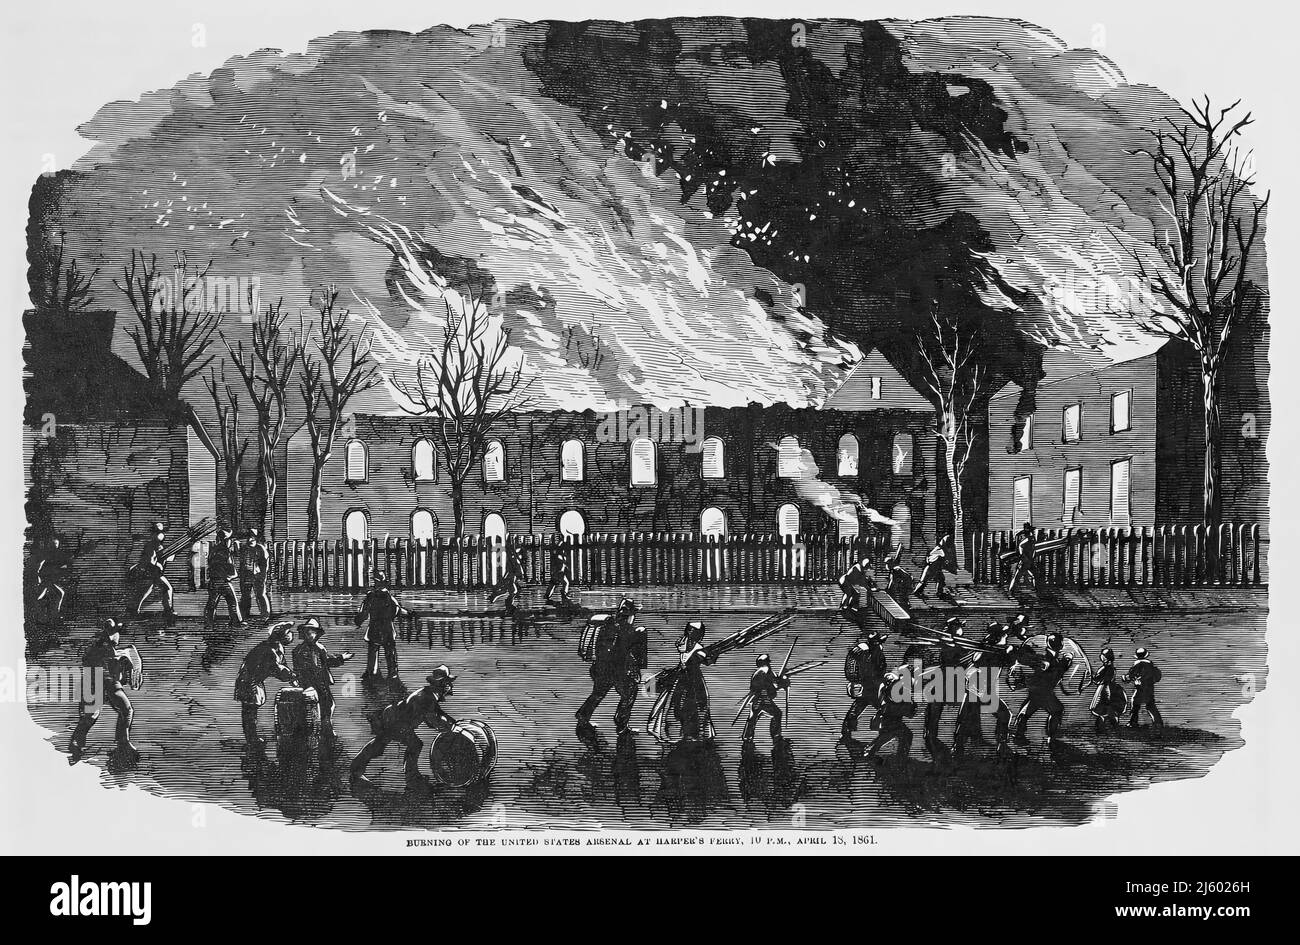 Burning of the United States Arsenal at Harper's Ferry, 10 P.M., April 18, 1861, in the American Civil War. 19th century illustration Stock Photo